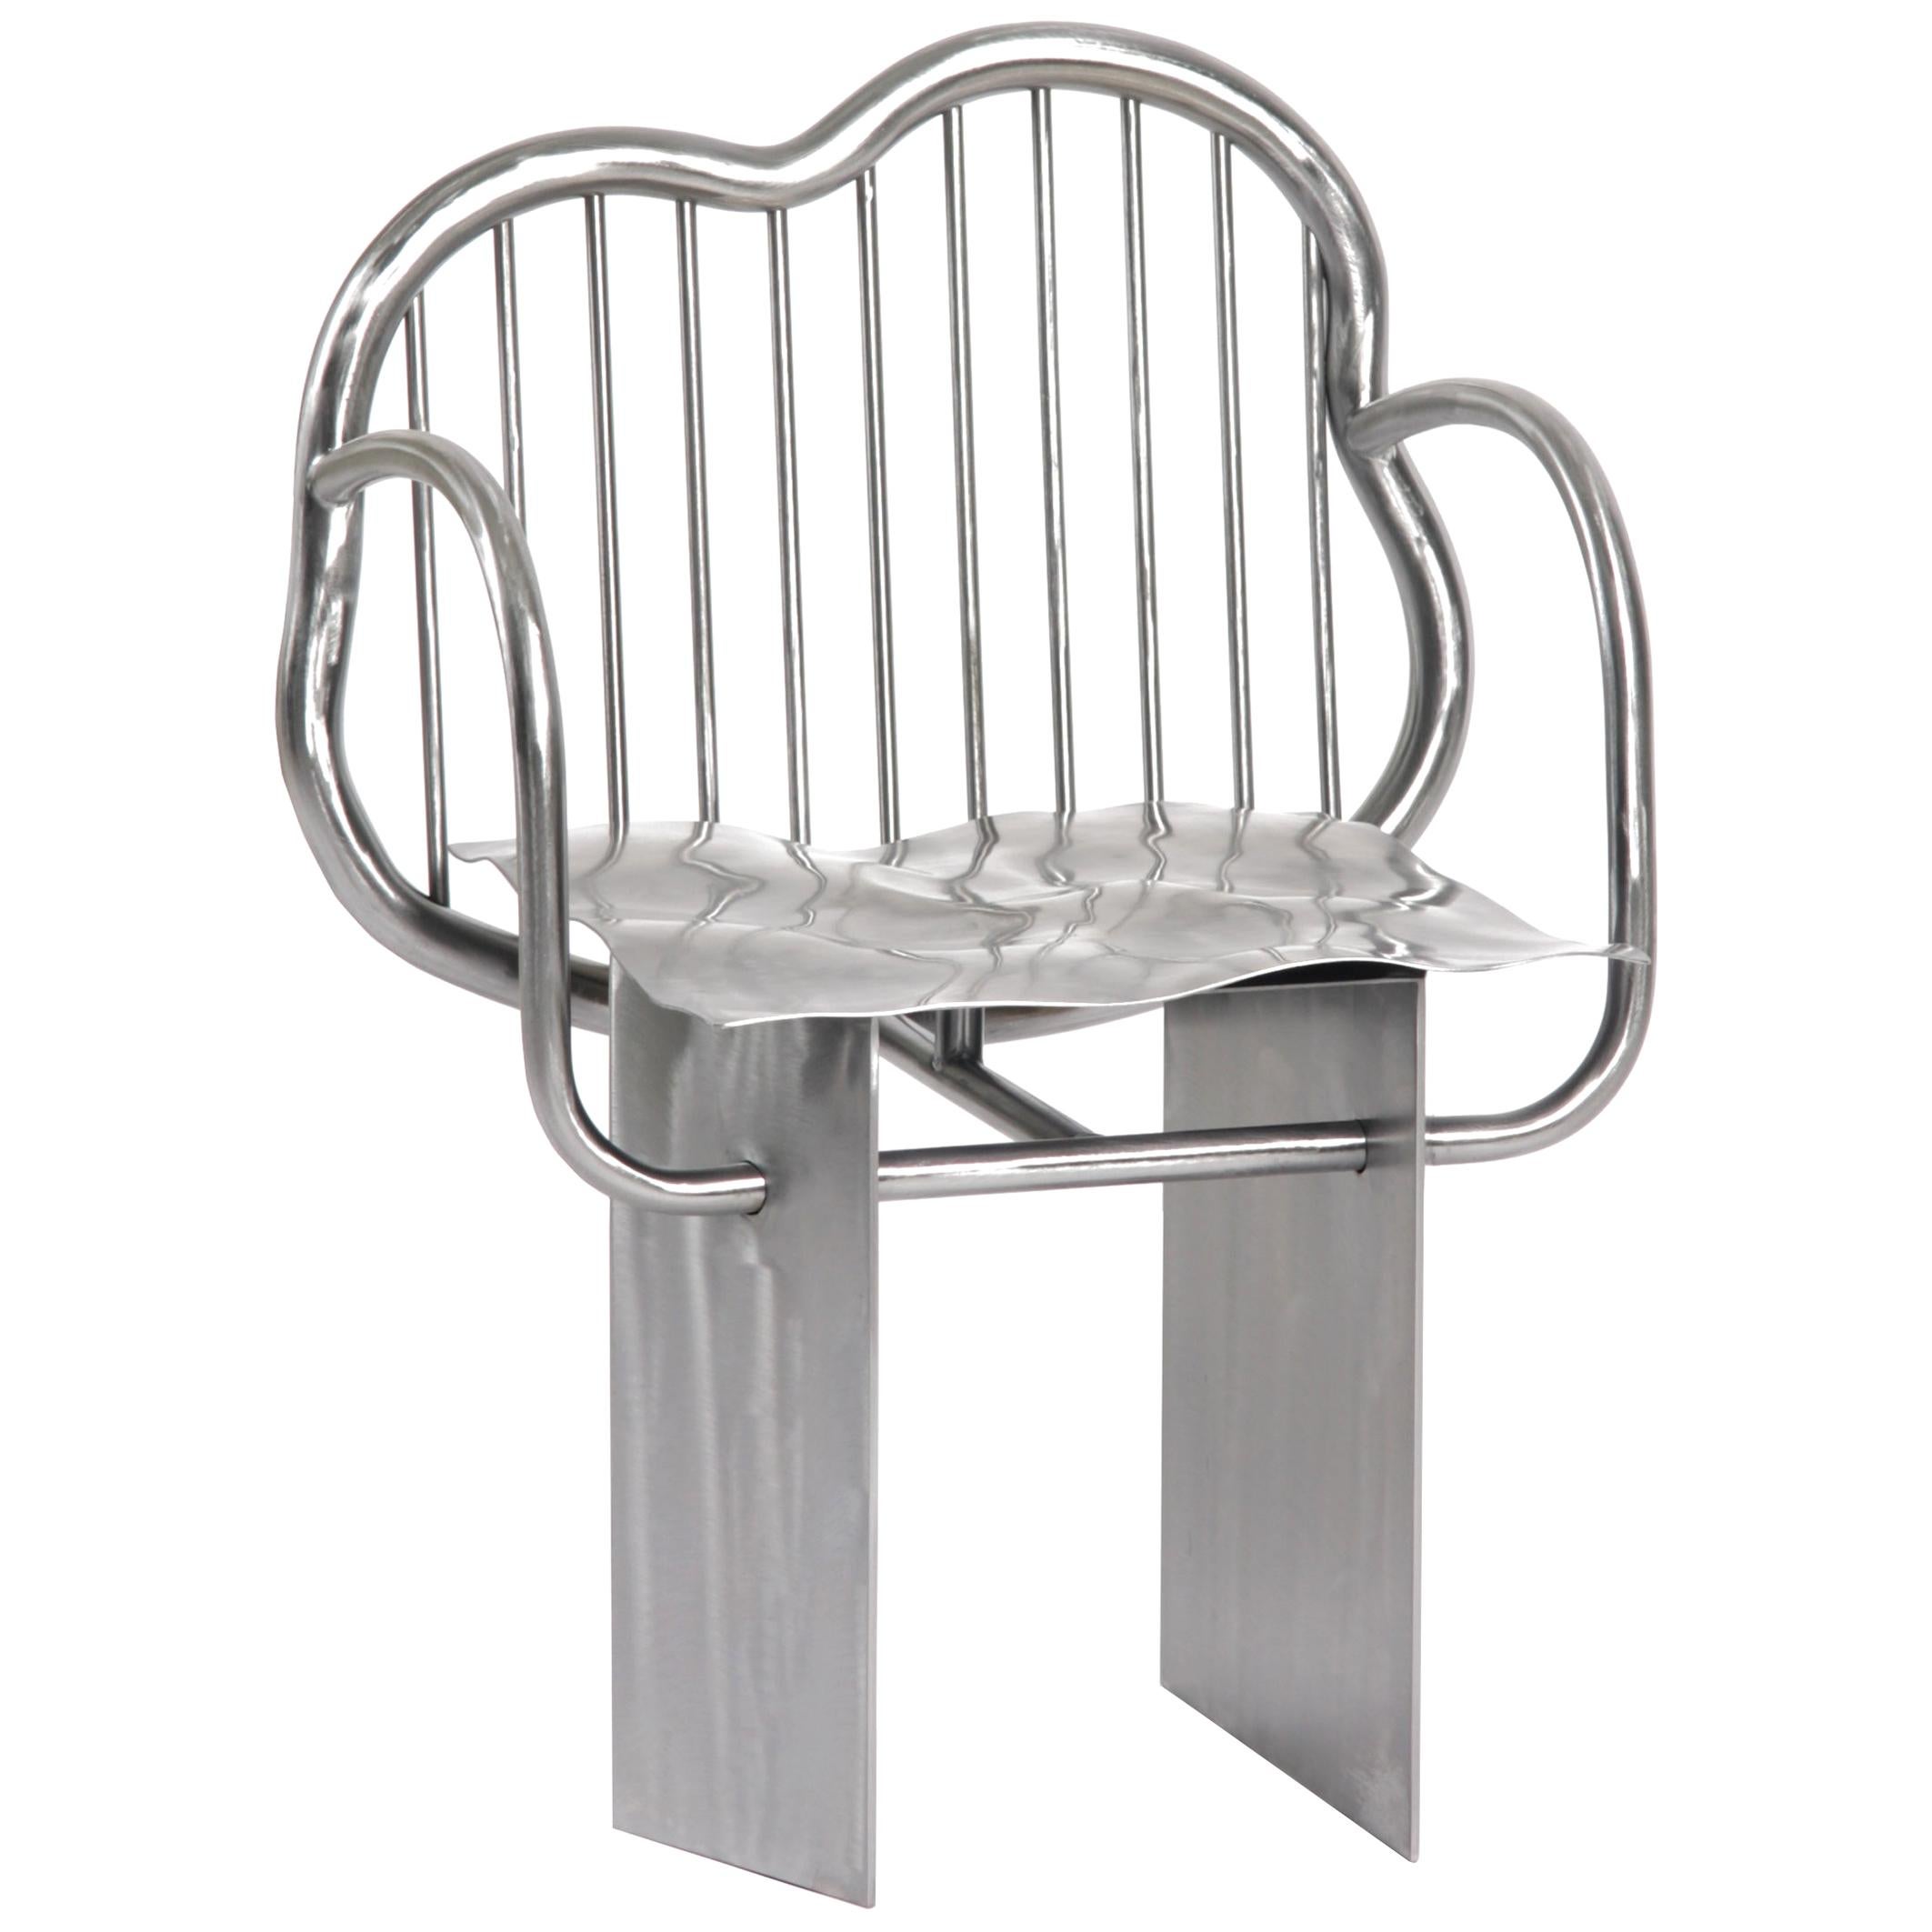 "Shiny Chair" in Stainless Steel by Supaform For Sale